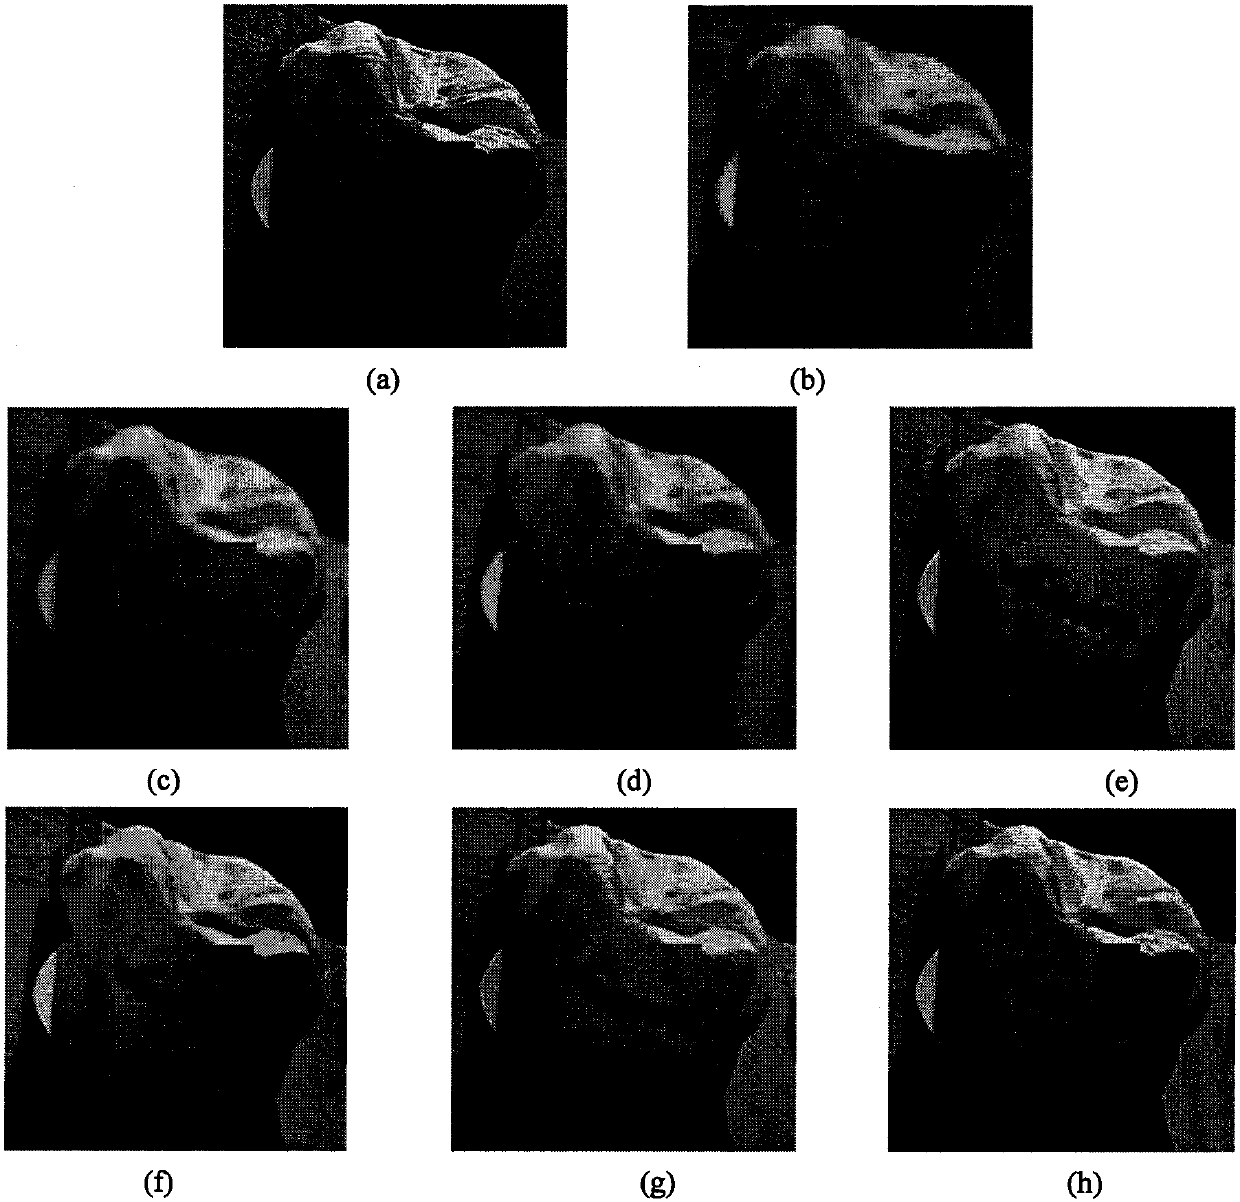 Improved self-adaptive multi-dictionary learning image super-resolution reconstruction method